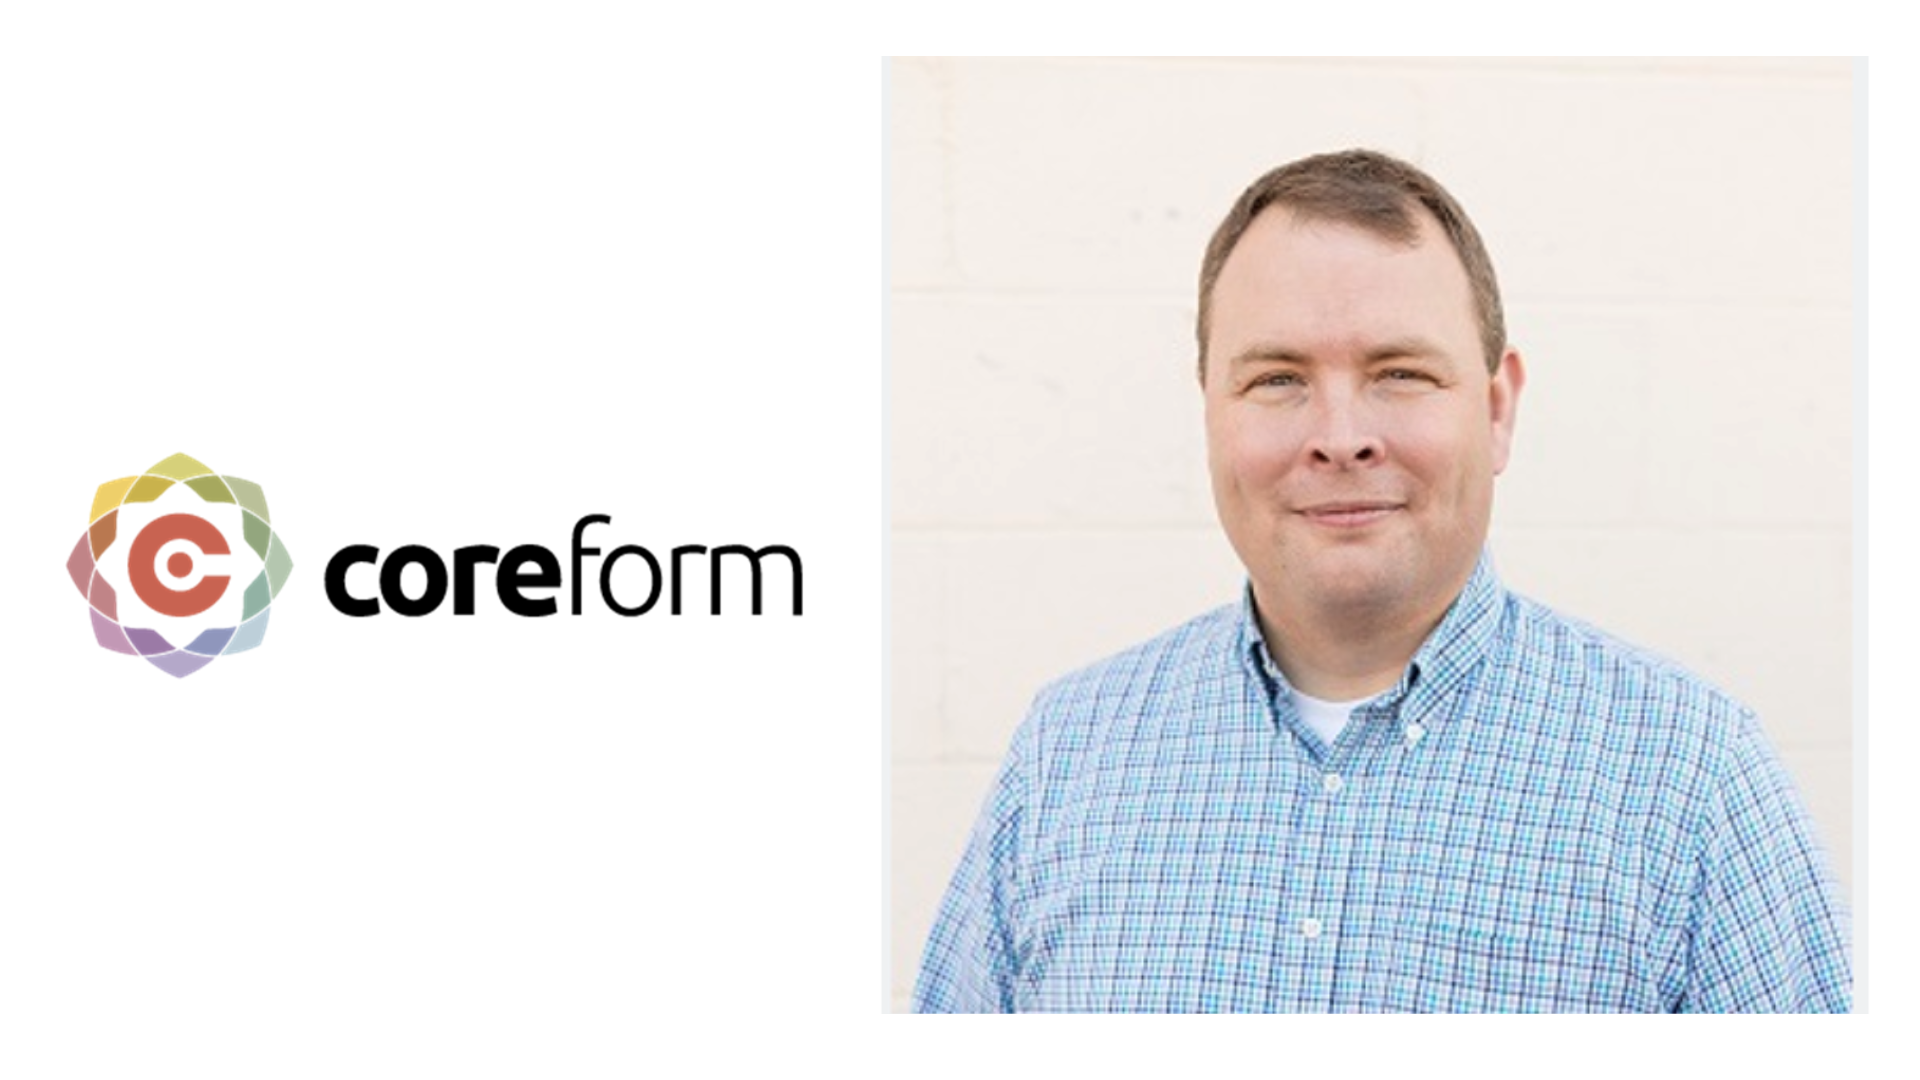 Coreform LLC, developer of next-generation computer-aided engineering software, welcomes Dr. Michael Scott as President.